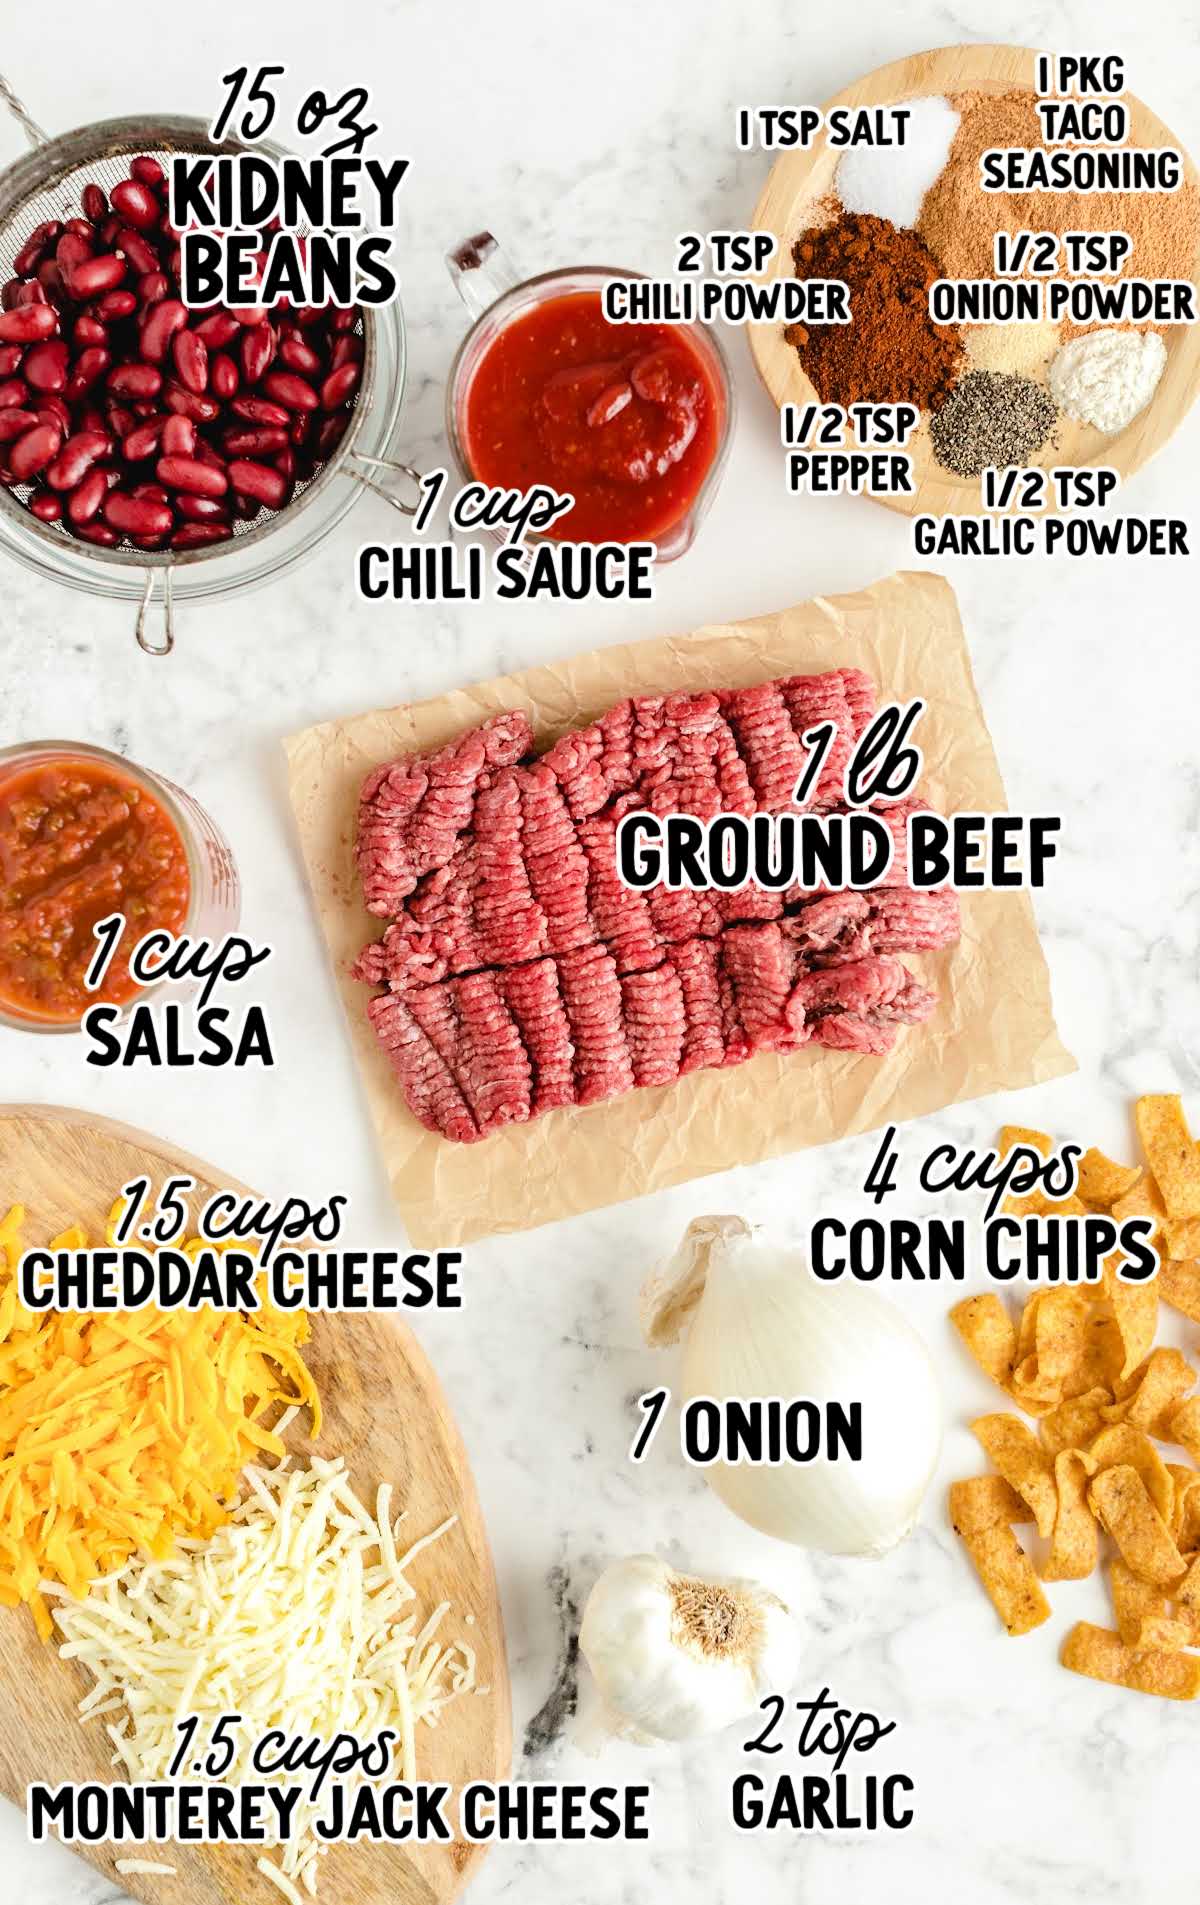 Frito Pie raw ingredients that are labeled